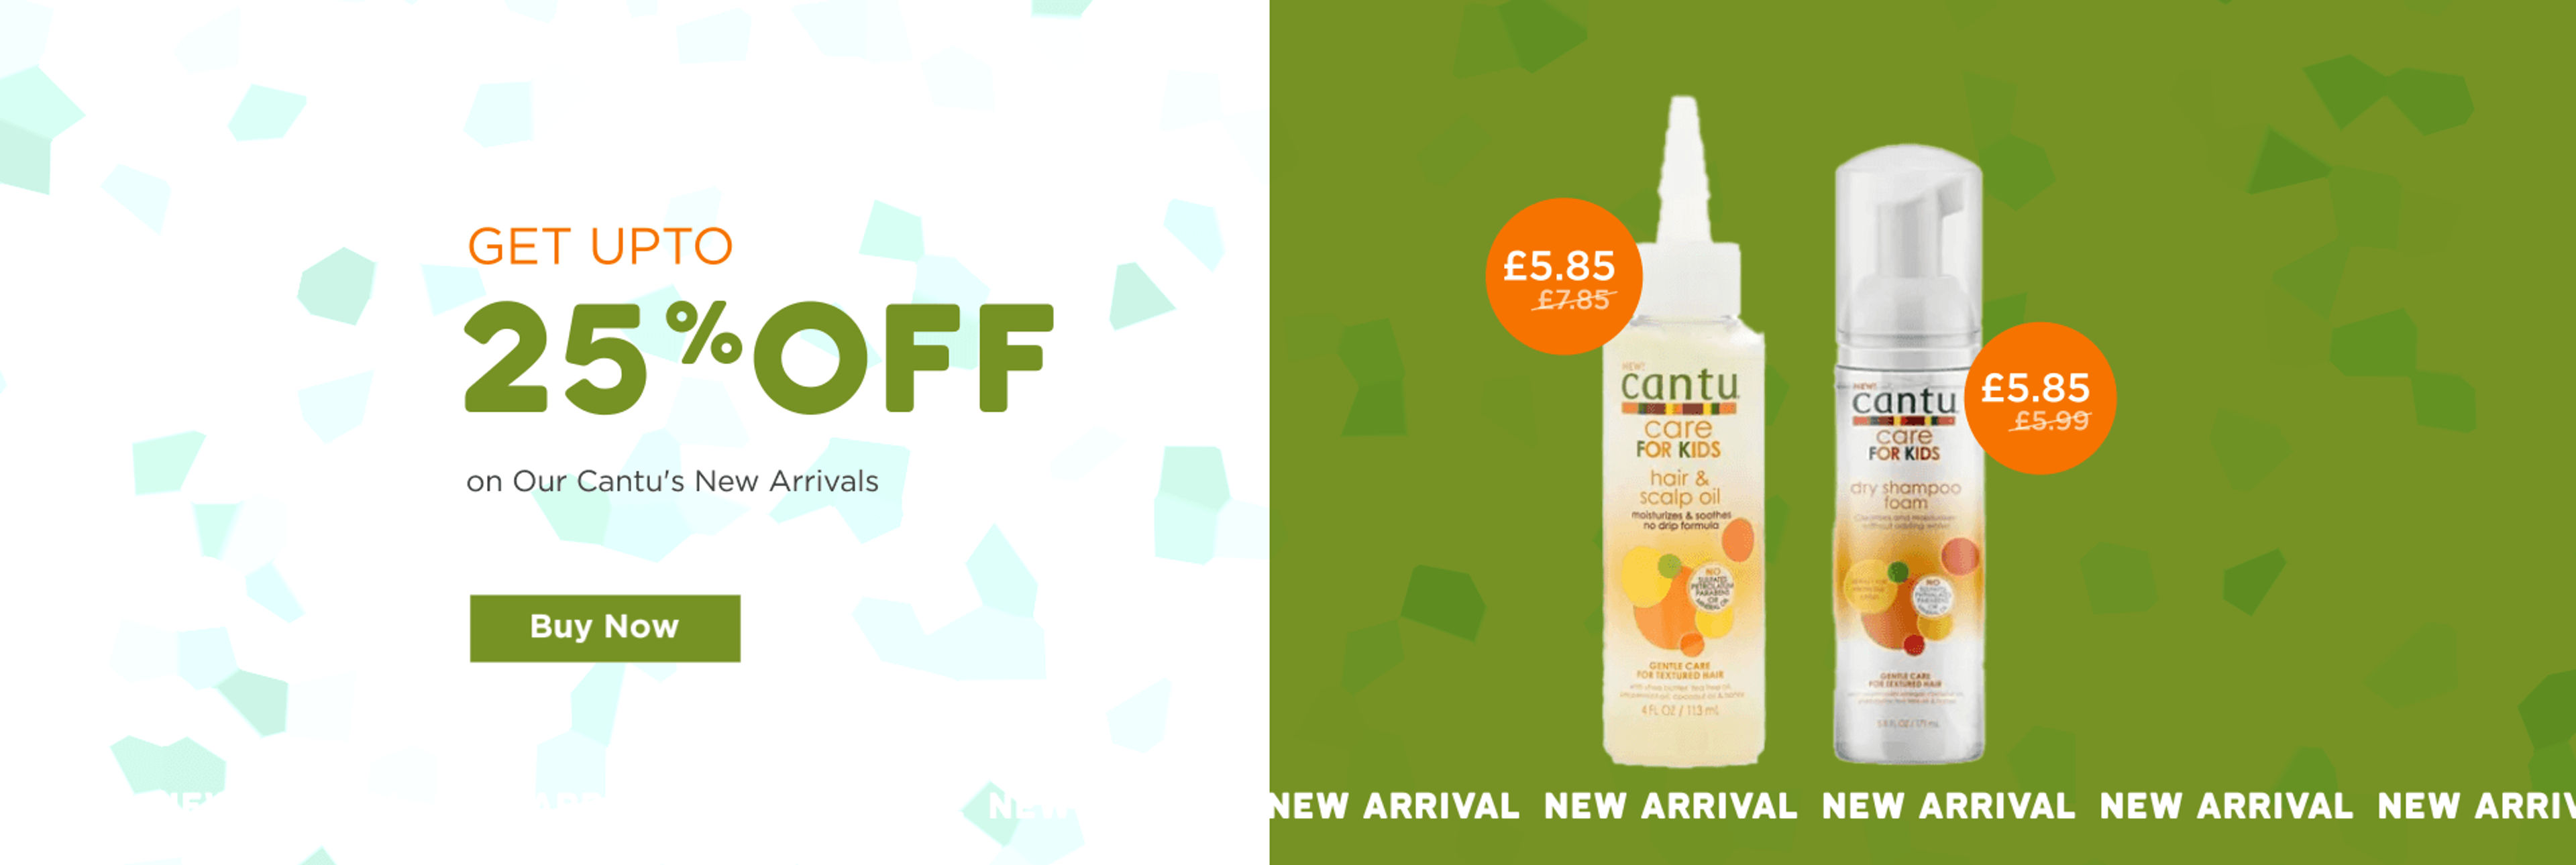 Get Upto 25% Off on Our Cantu's New Arrivals 